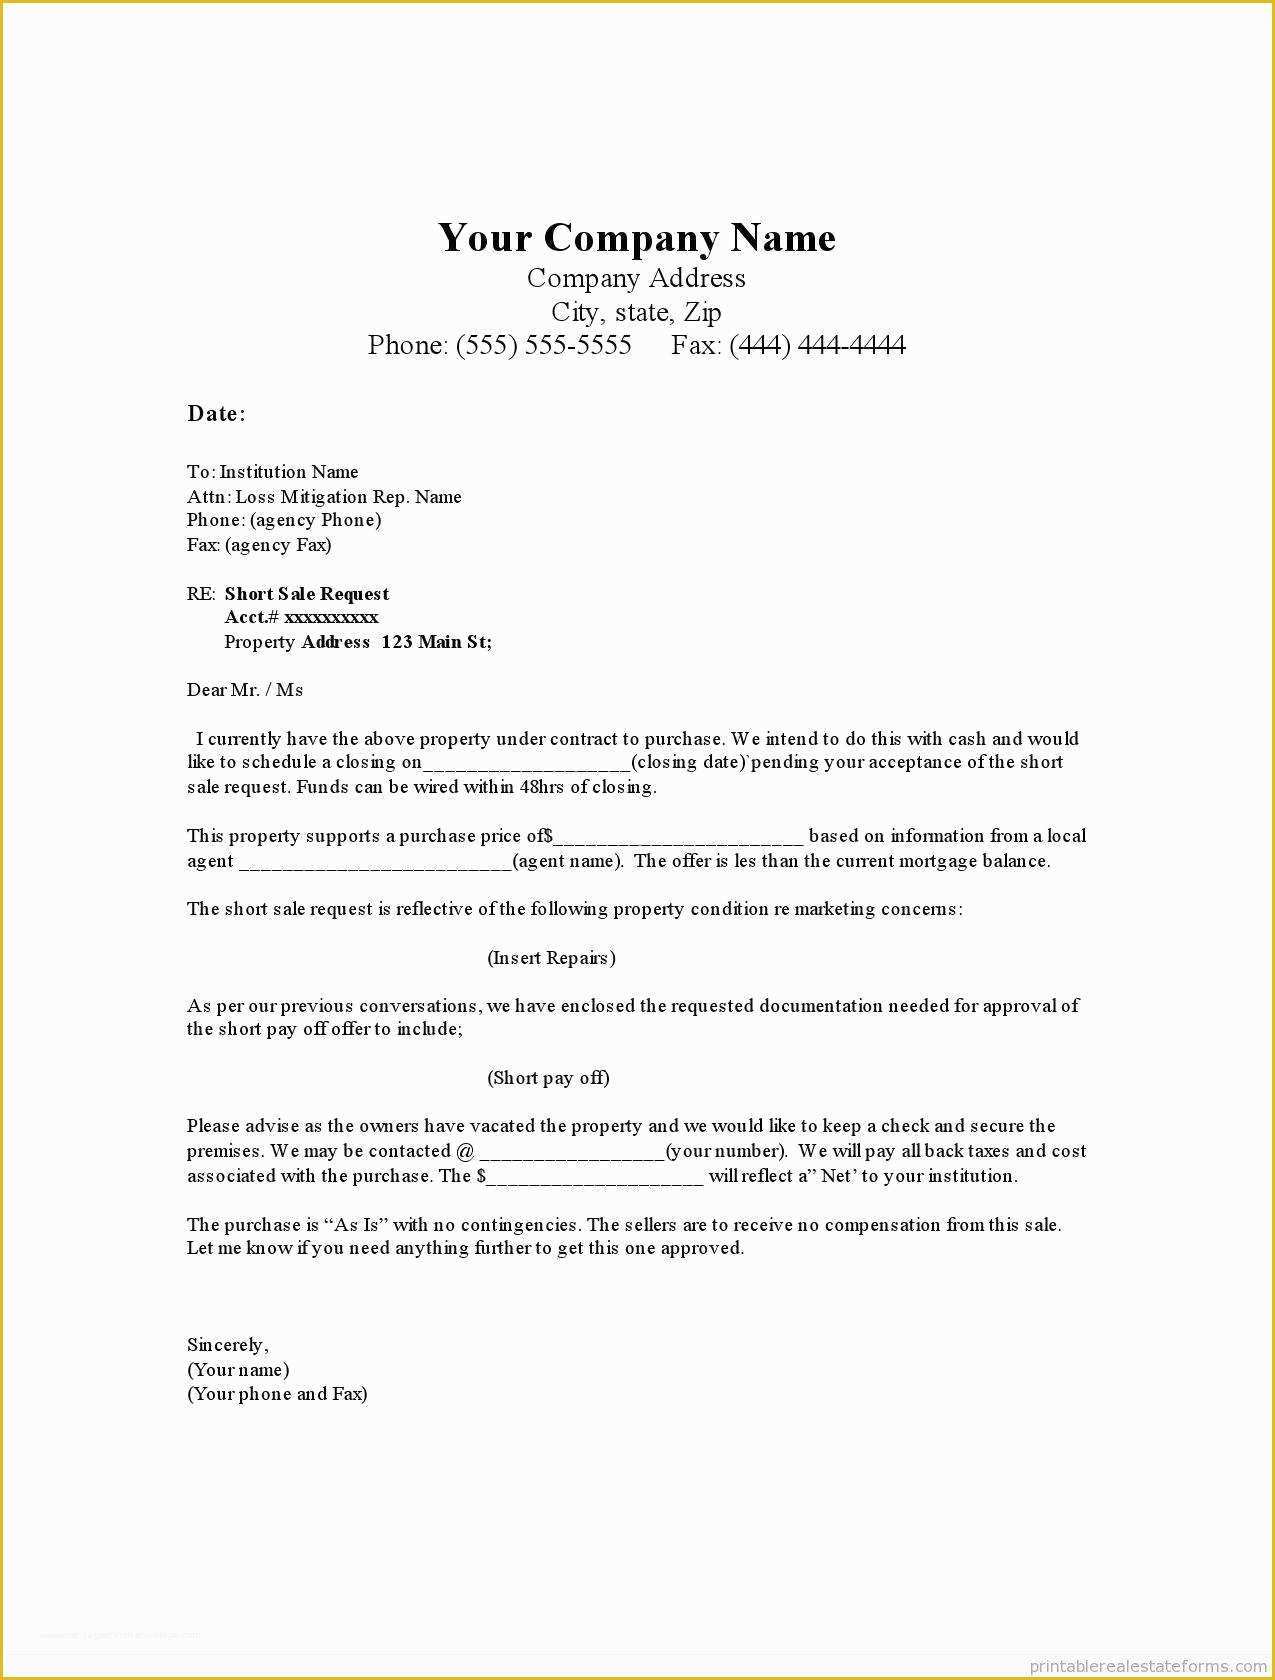 Real Estate Offer Template Free Of Real Estate Fer Letter Template Free Collection